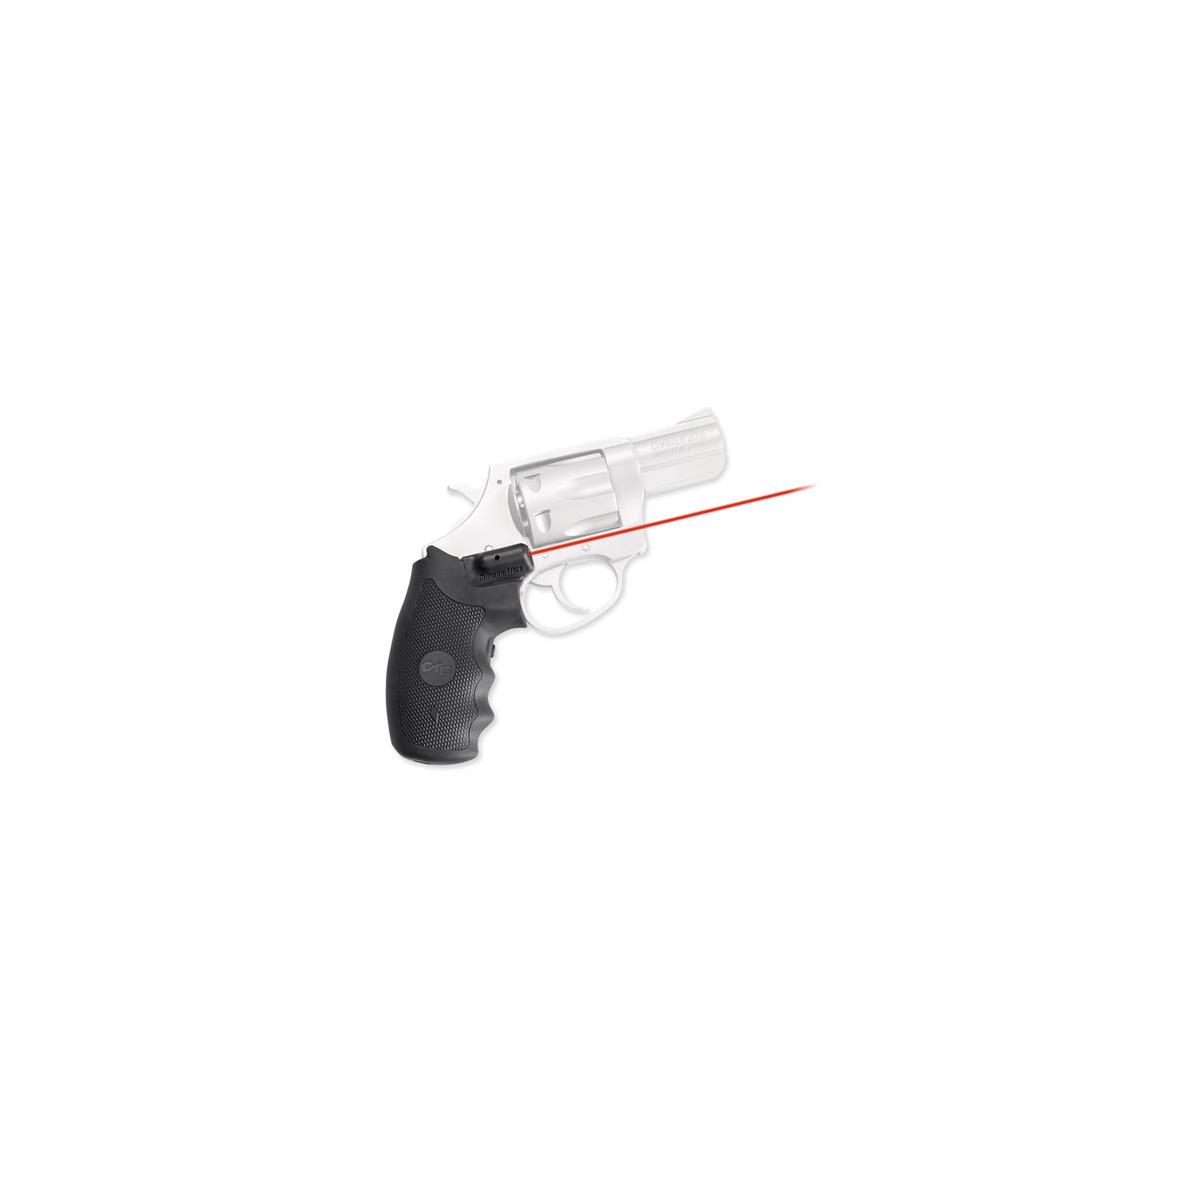 Image of Crimson Trace Lasergrips Red Laser Sight for Charter Arms Revolvers